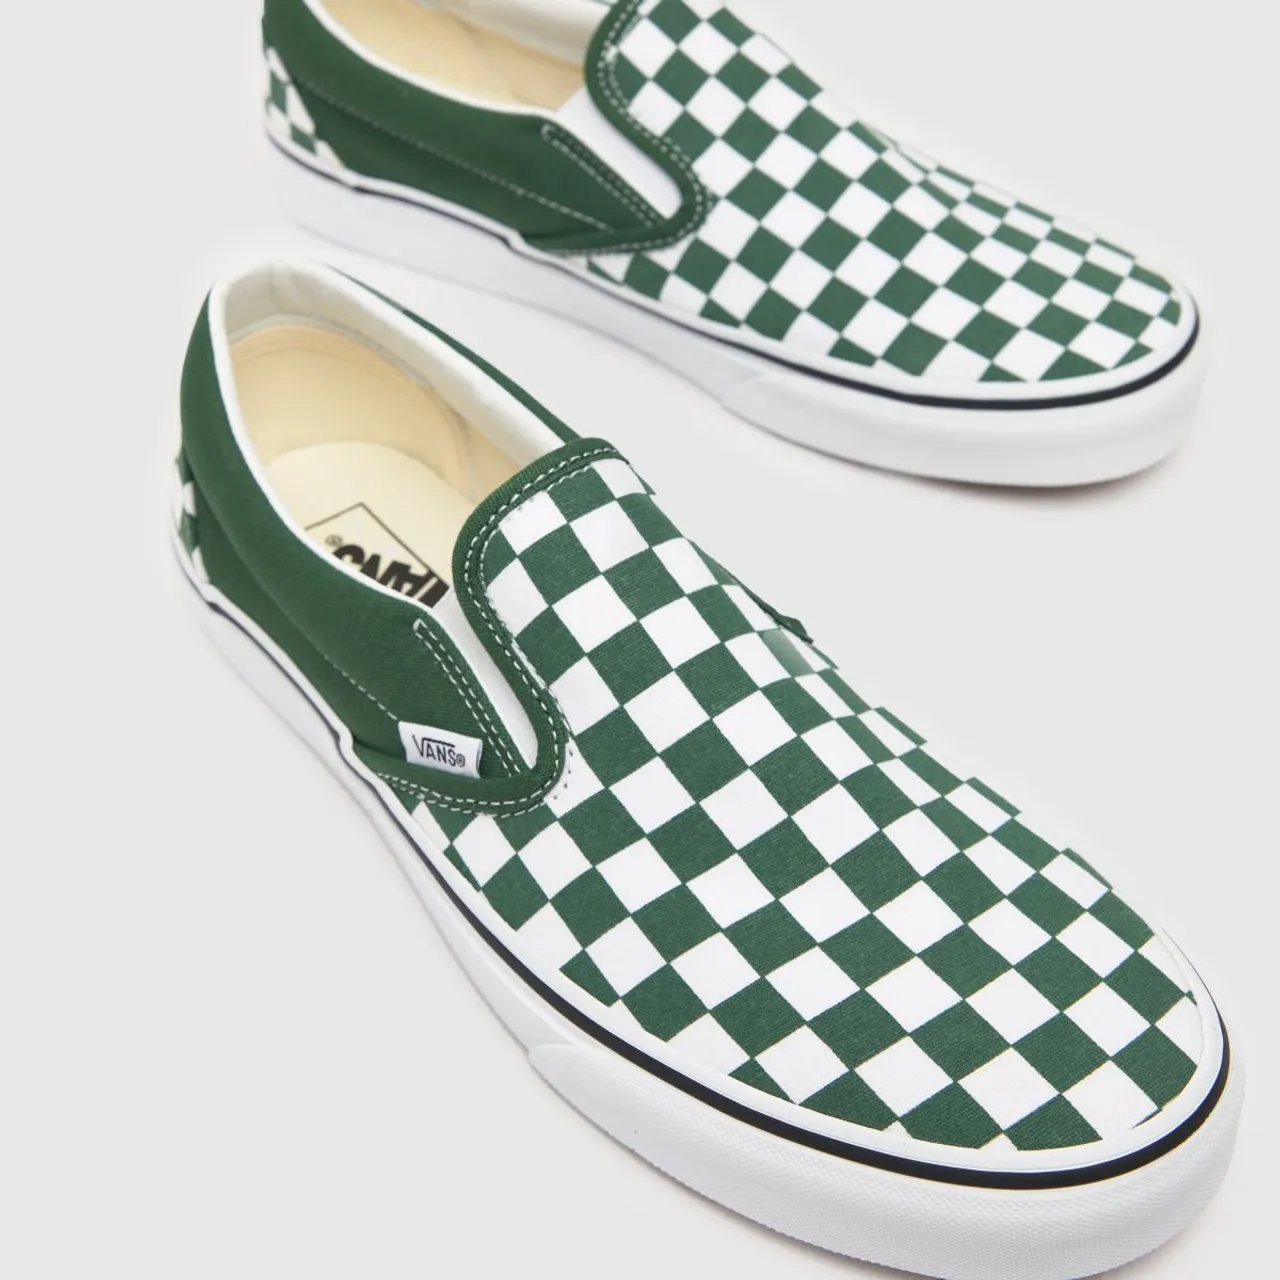 Vans Classic Slip On Trainers In Green